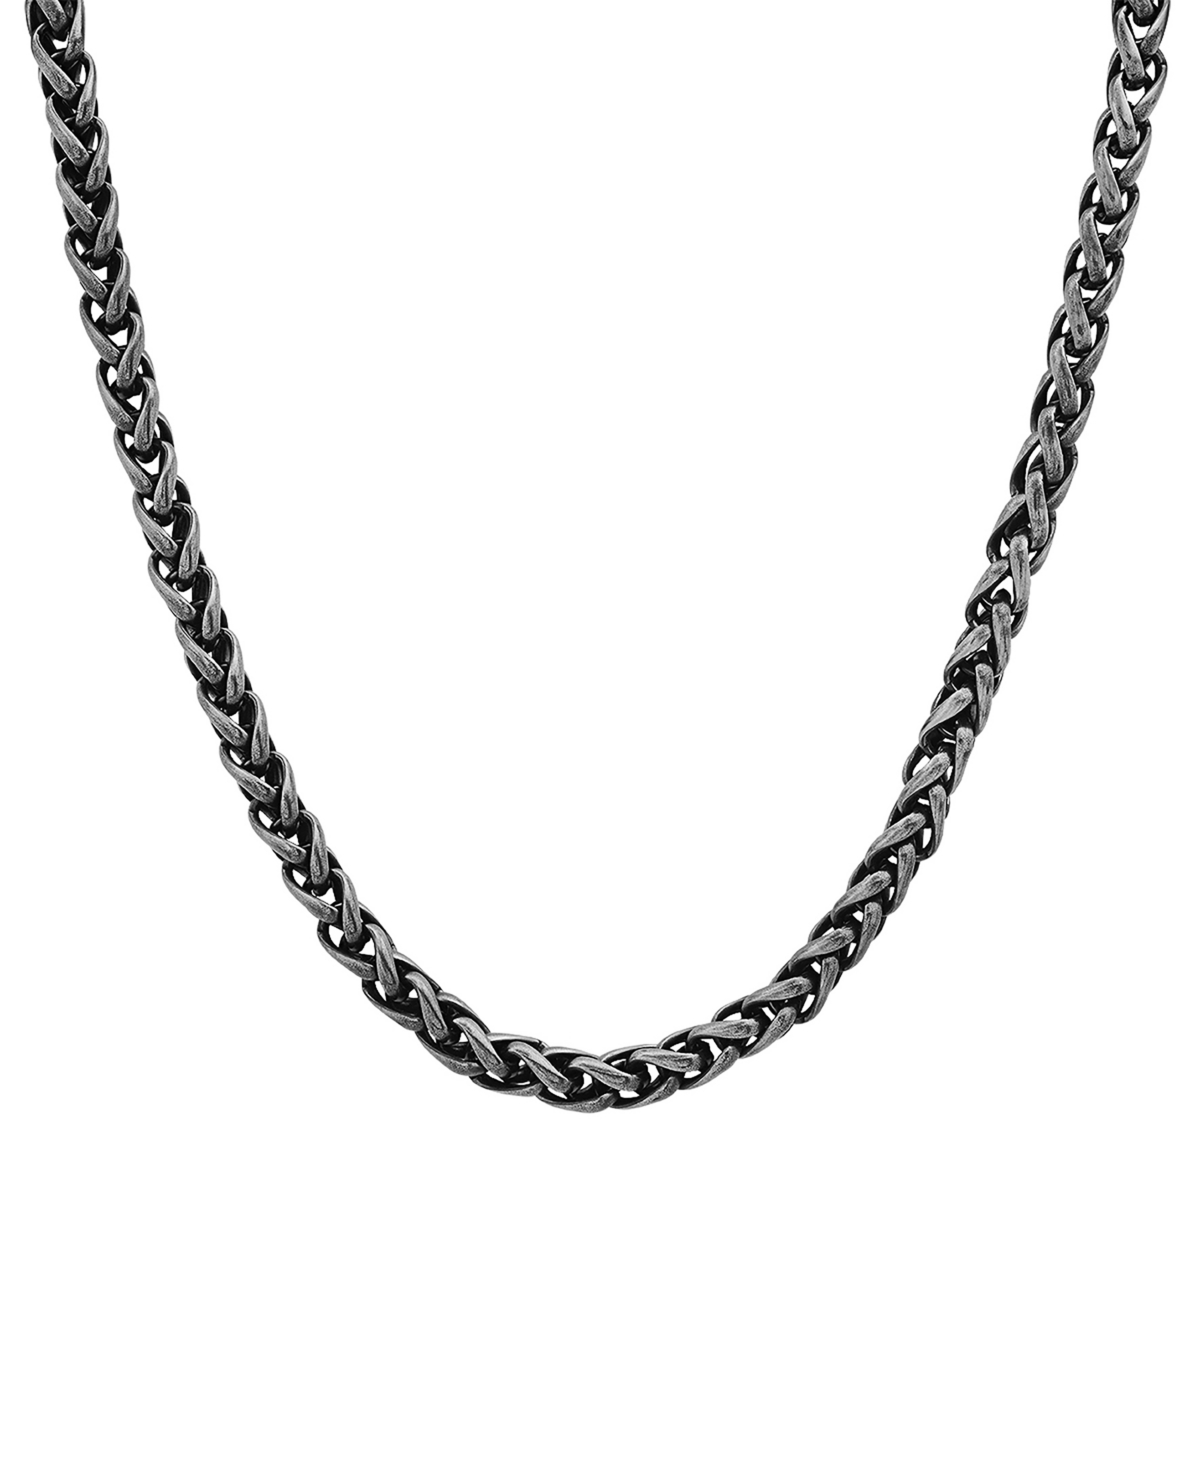 Hmy Jewelry Single Strand Wheat Chain Necklace In Gray